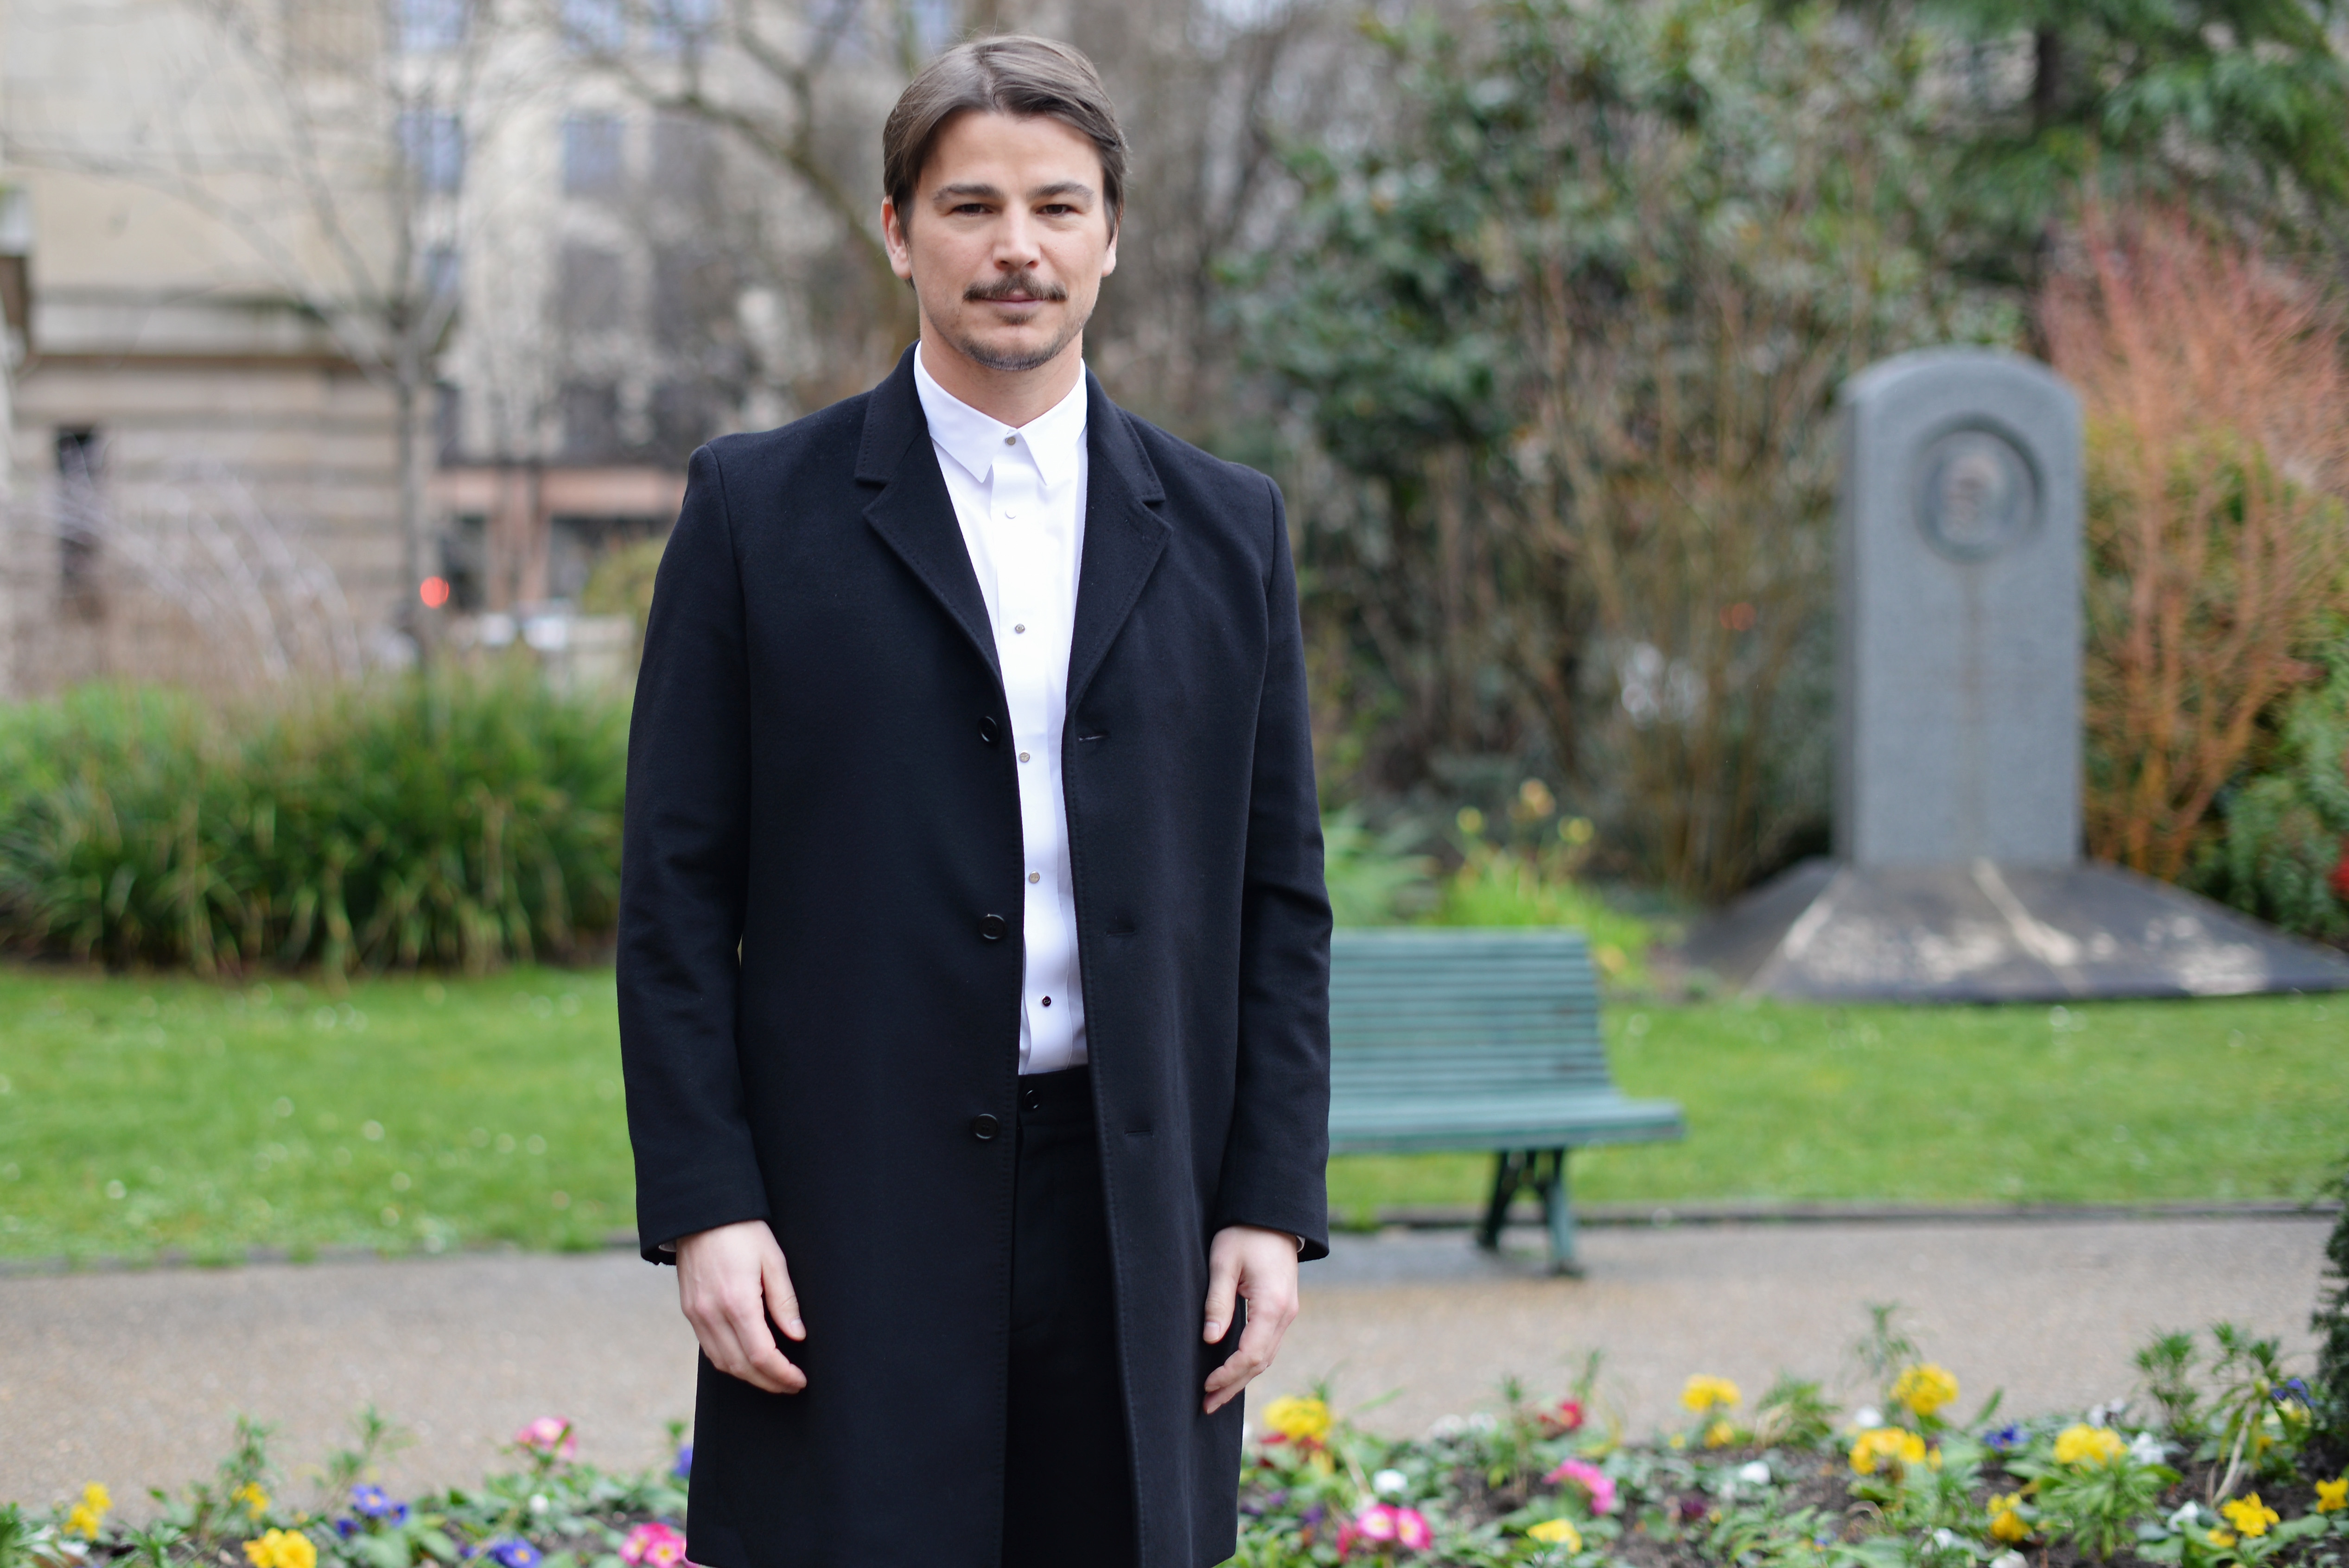 PARIS, FRANCE - JANUARY 20: Josh Hartnett attends the Dior Homme Menswear Fall/Winter 2018-2019 show as part of Paris Fashion Week on January 20, 2018 in Paris, France. (Photo by Vanni Bassetti/Getty Images for Dior Homme)